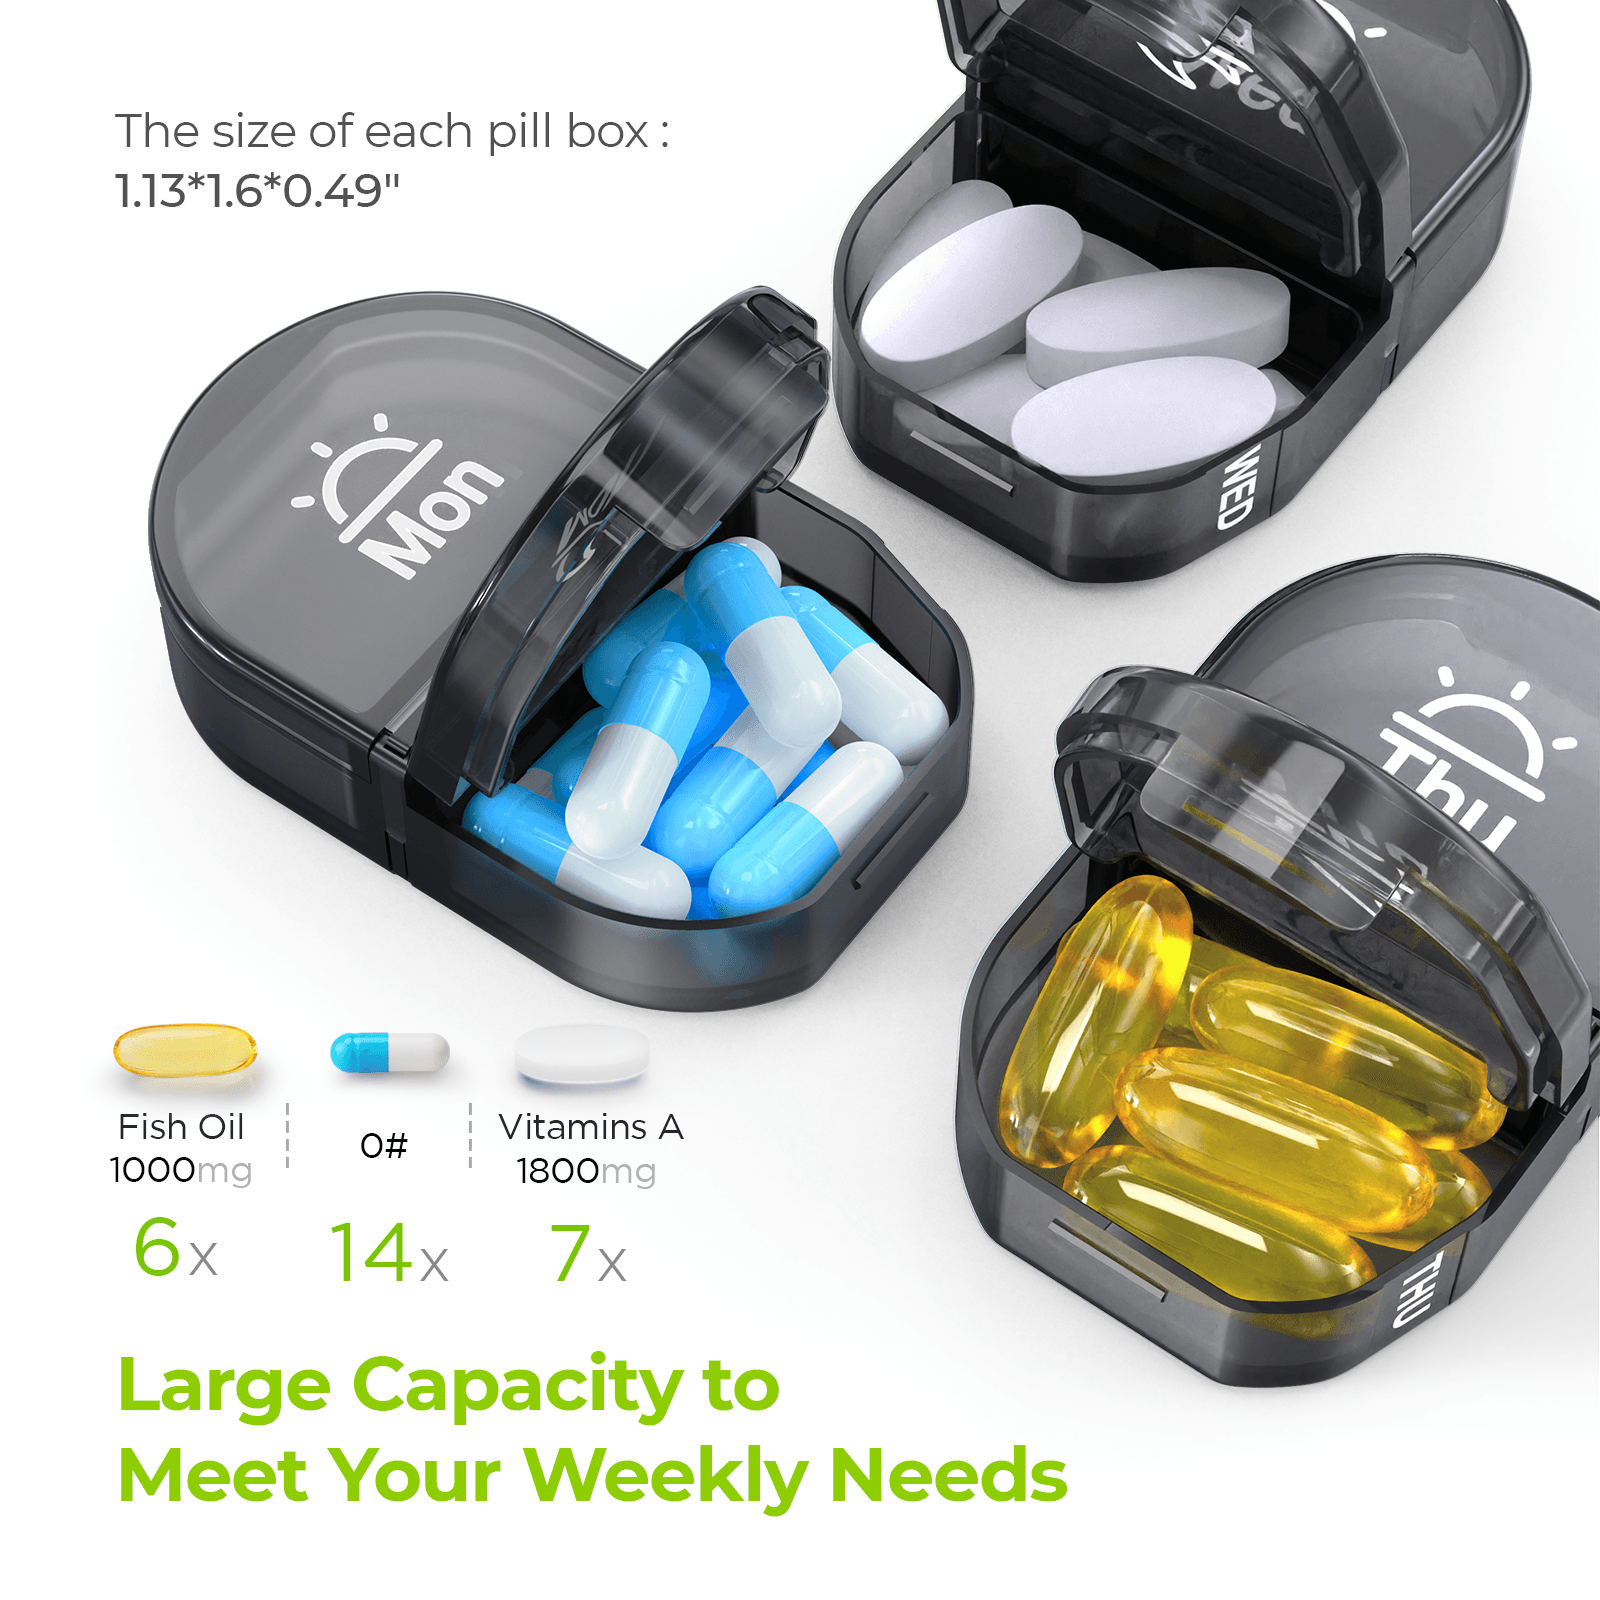 AUVON Canvas Bag Weekly Pill Organizer 2 Times a Day, Large AM/PM Pill Box 7 Day with Portable Zipper Cloth Bag for Holding Supplements, Vitamins and Fish Oils - AUVON